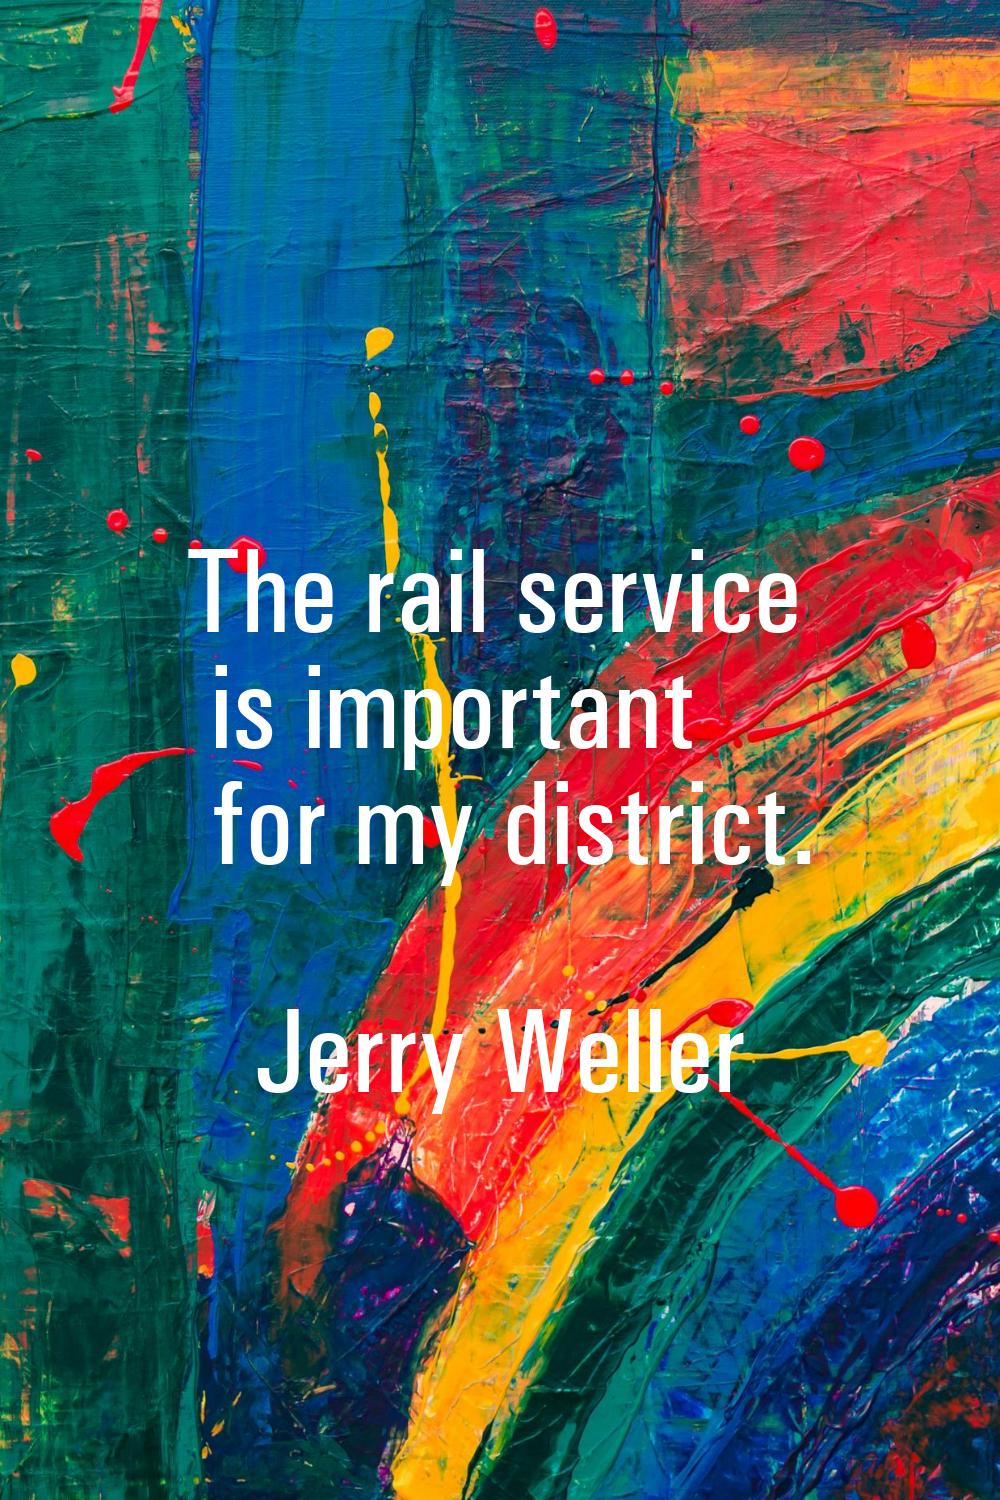 The rail service is important for my district.